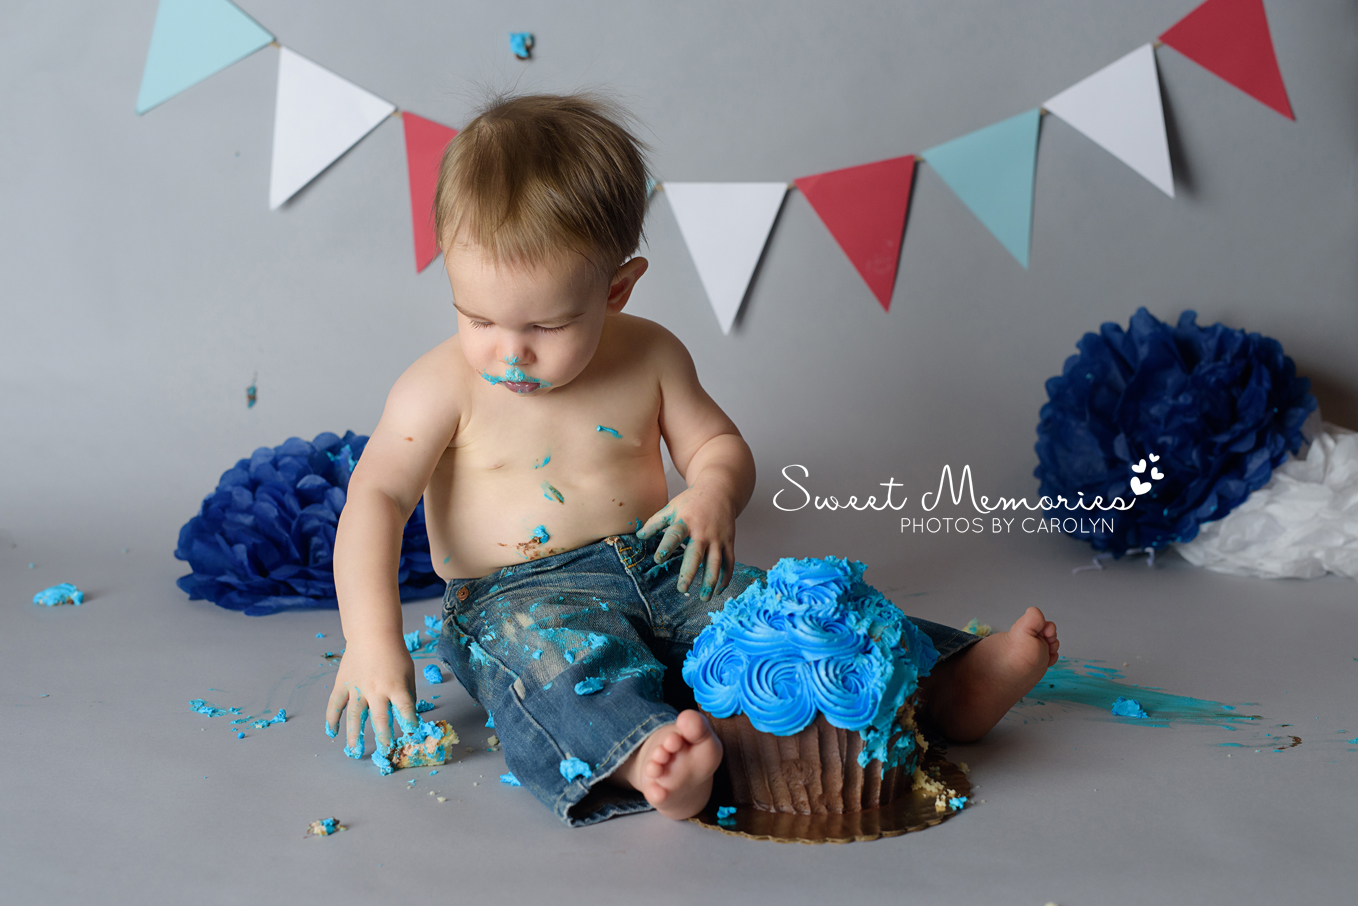 messy one year old boy cake smash on gray background with large blue cupcake  | Sweet Memories Photos by Carolyn